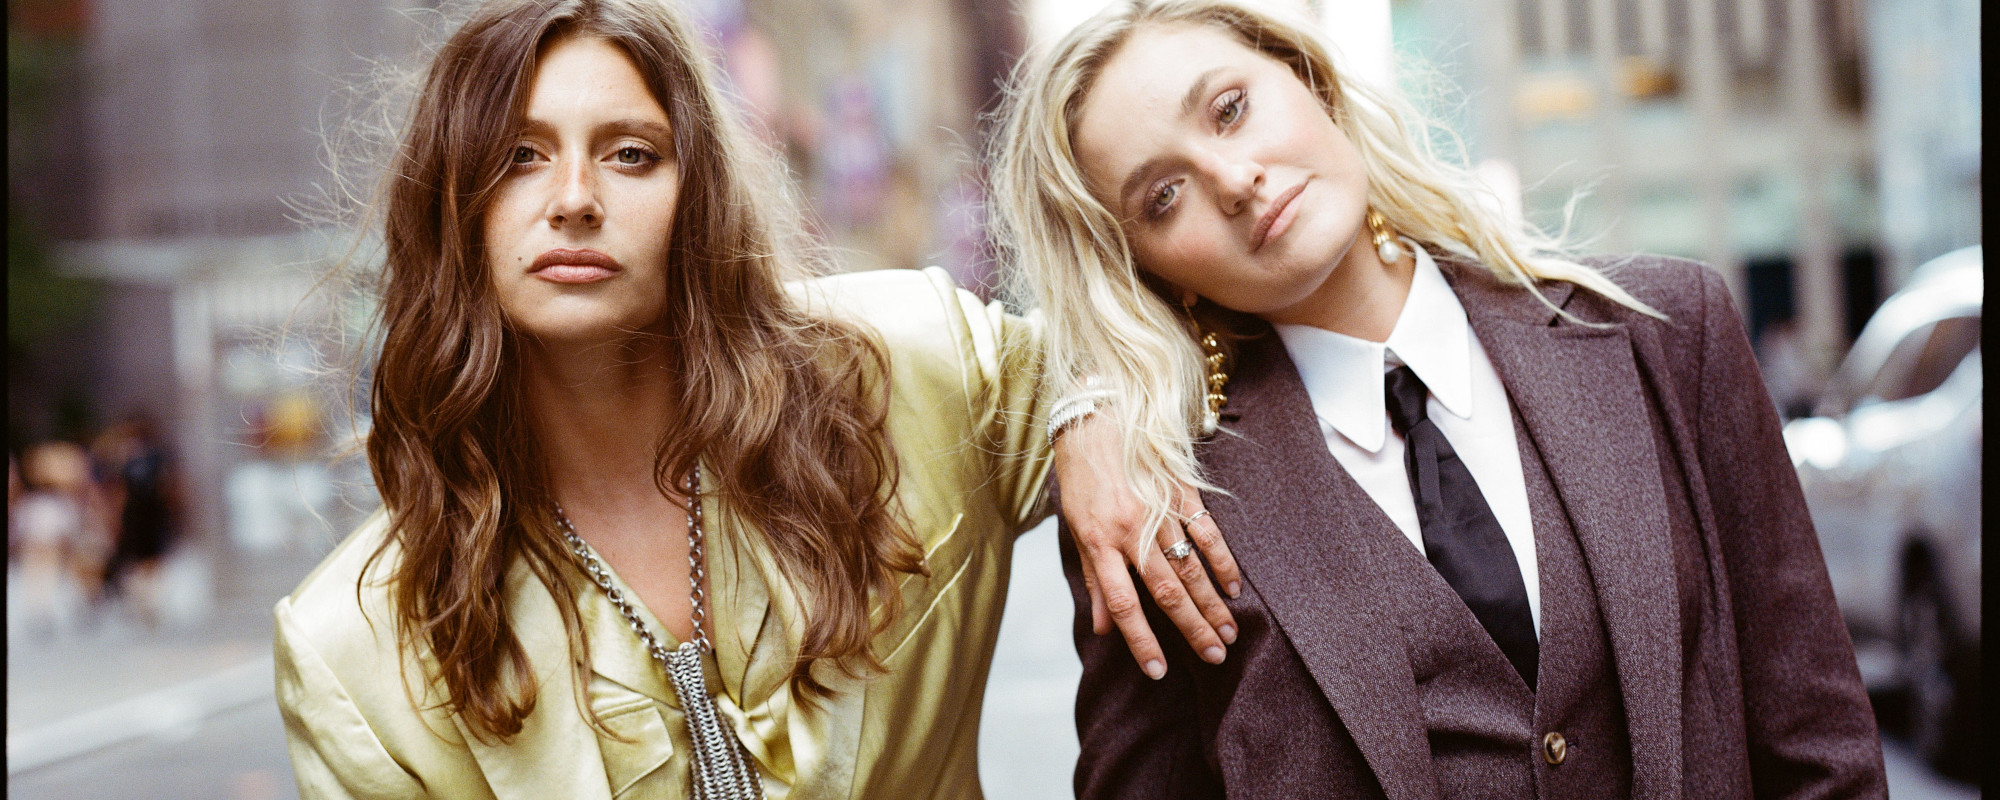 New Song Saturday! Hear New Music From Aly&AJ, P!NK, Janet Jackson, Tom Odell & More!